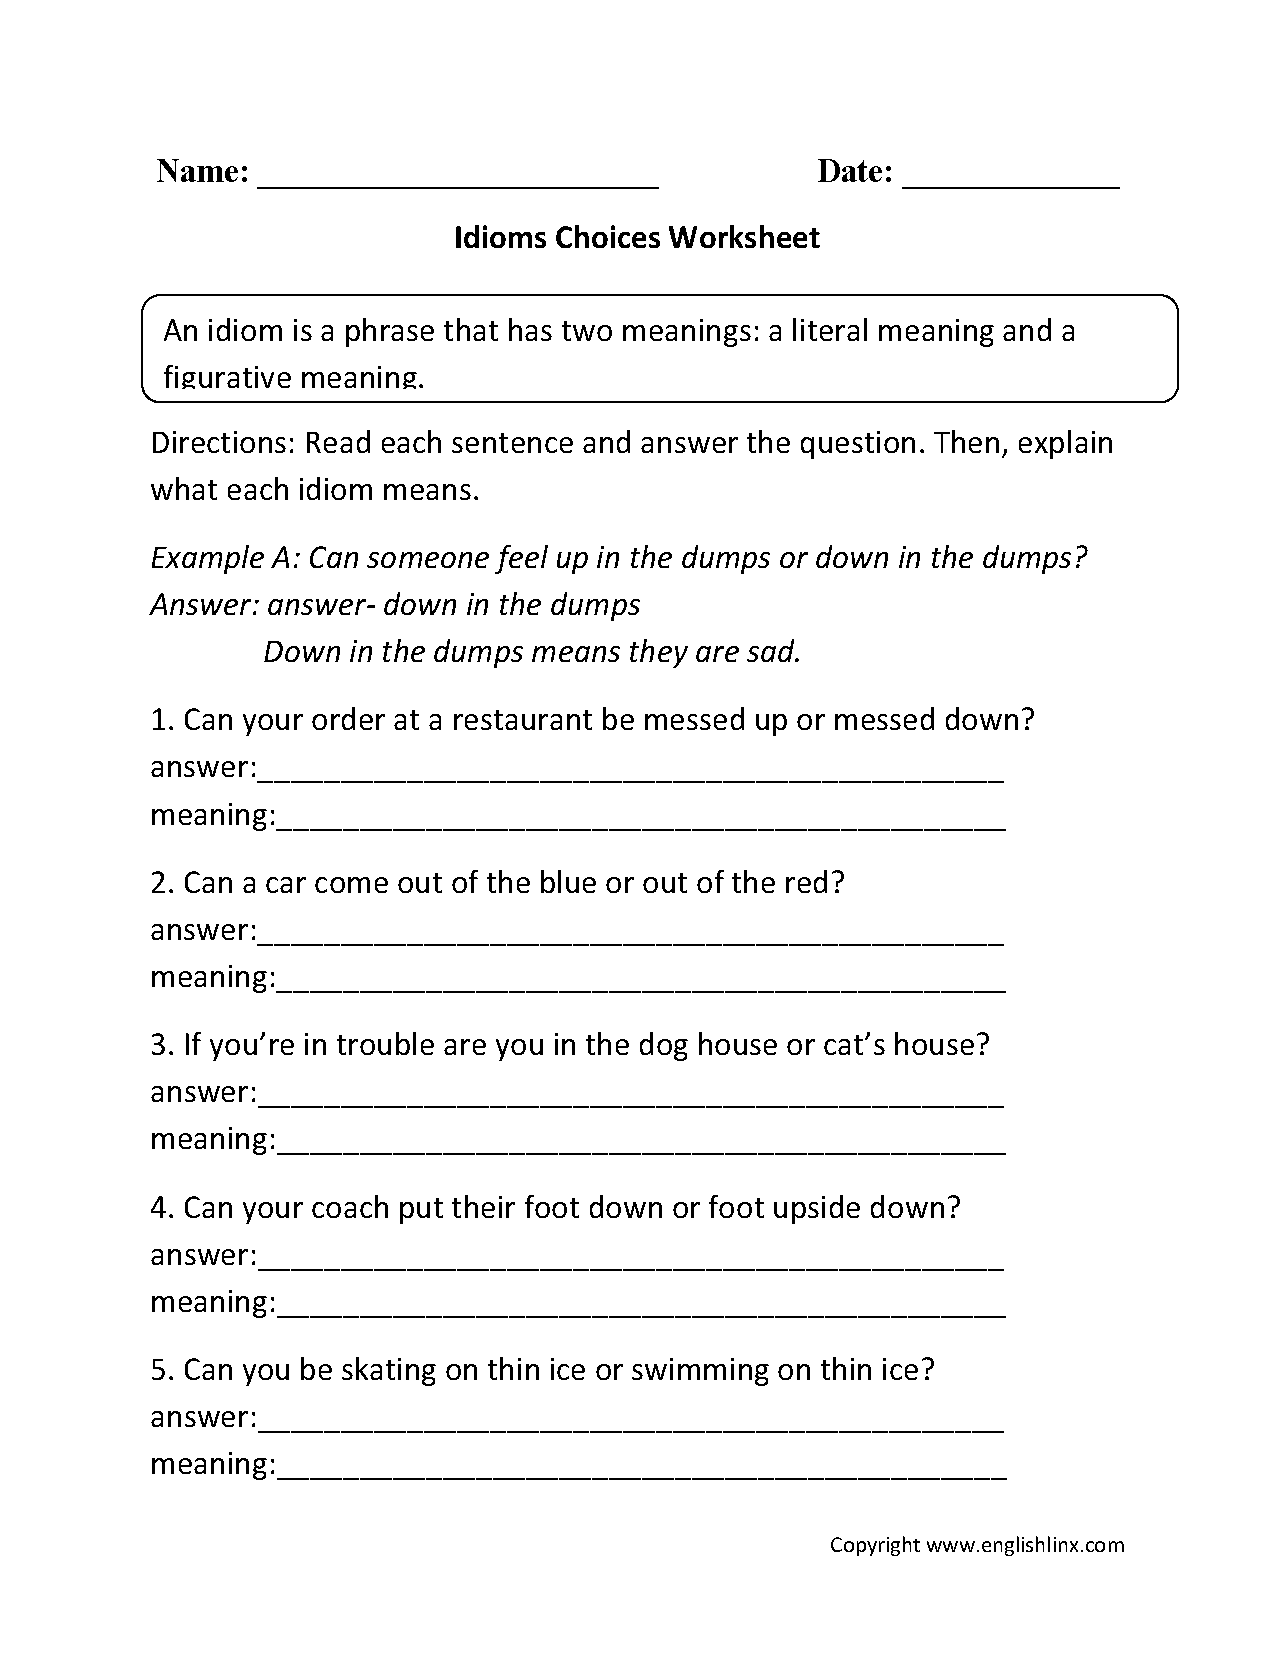 Idioms Choices Worksheets